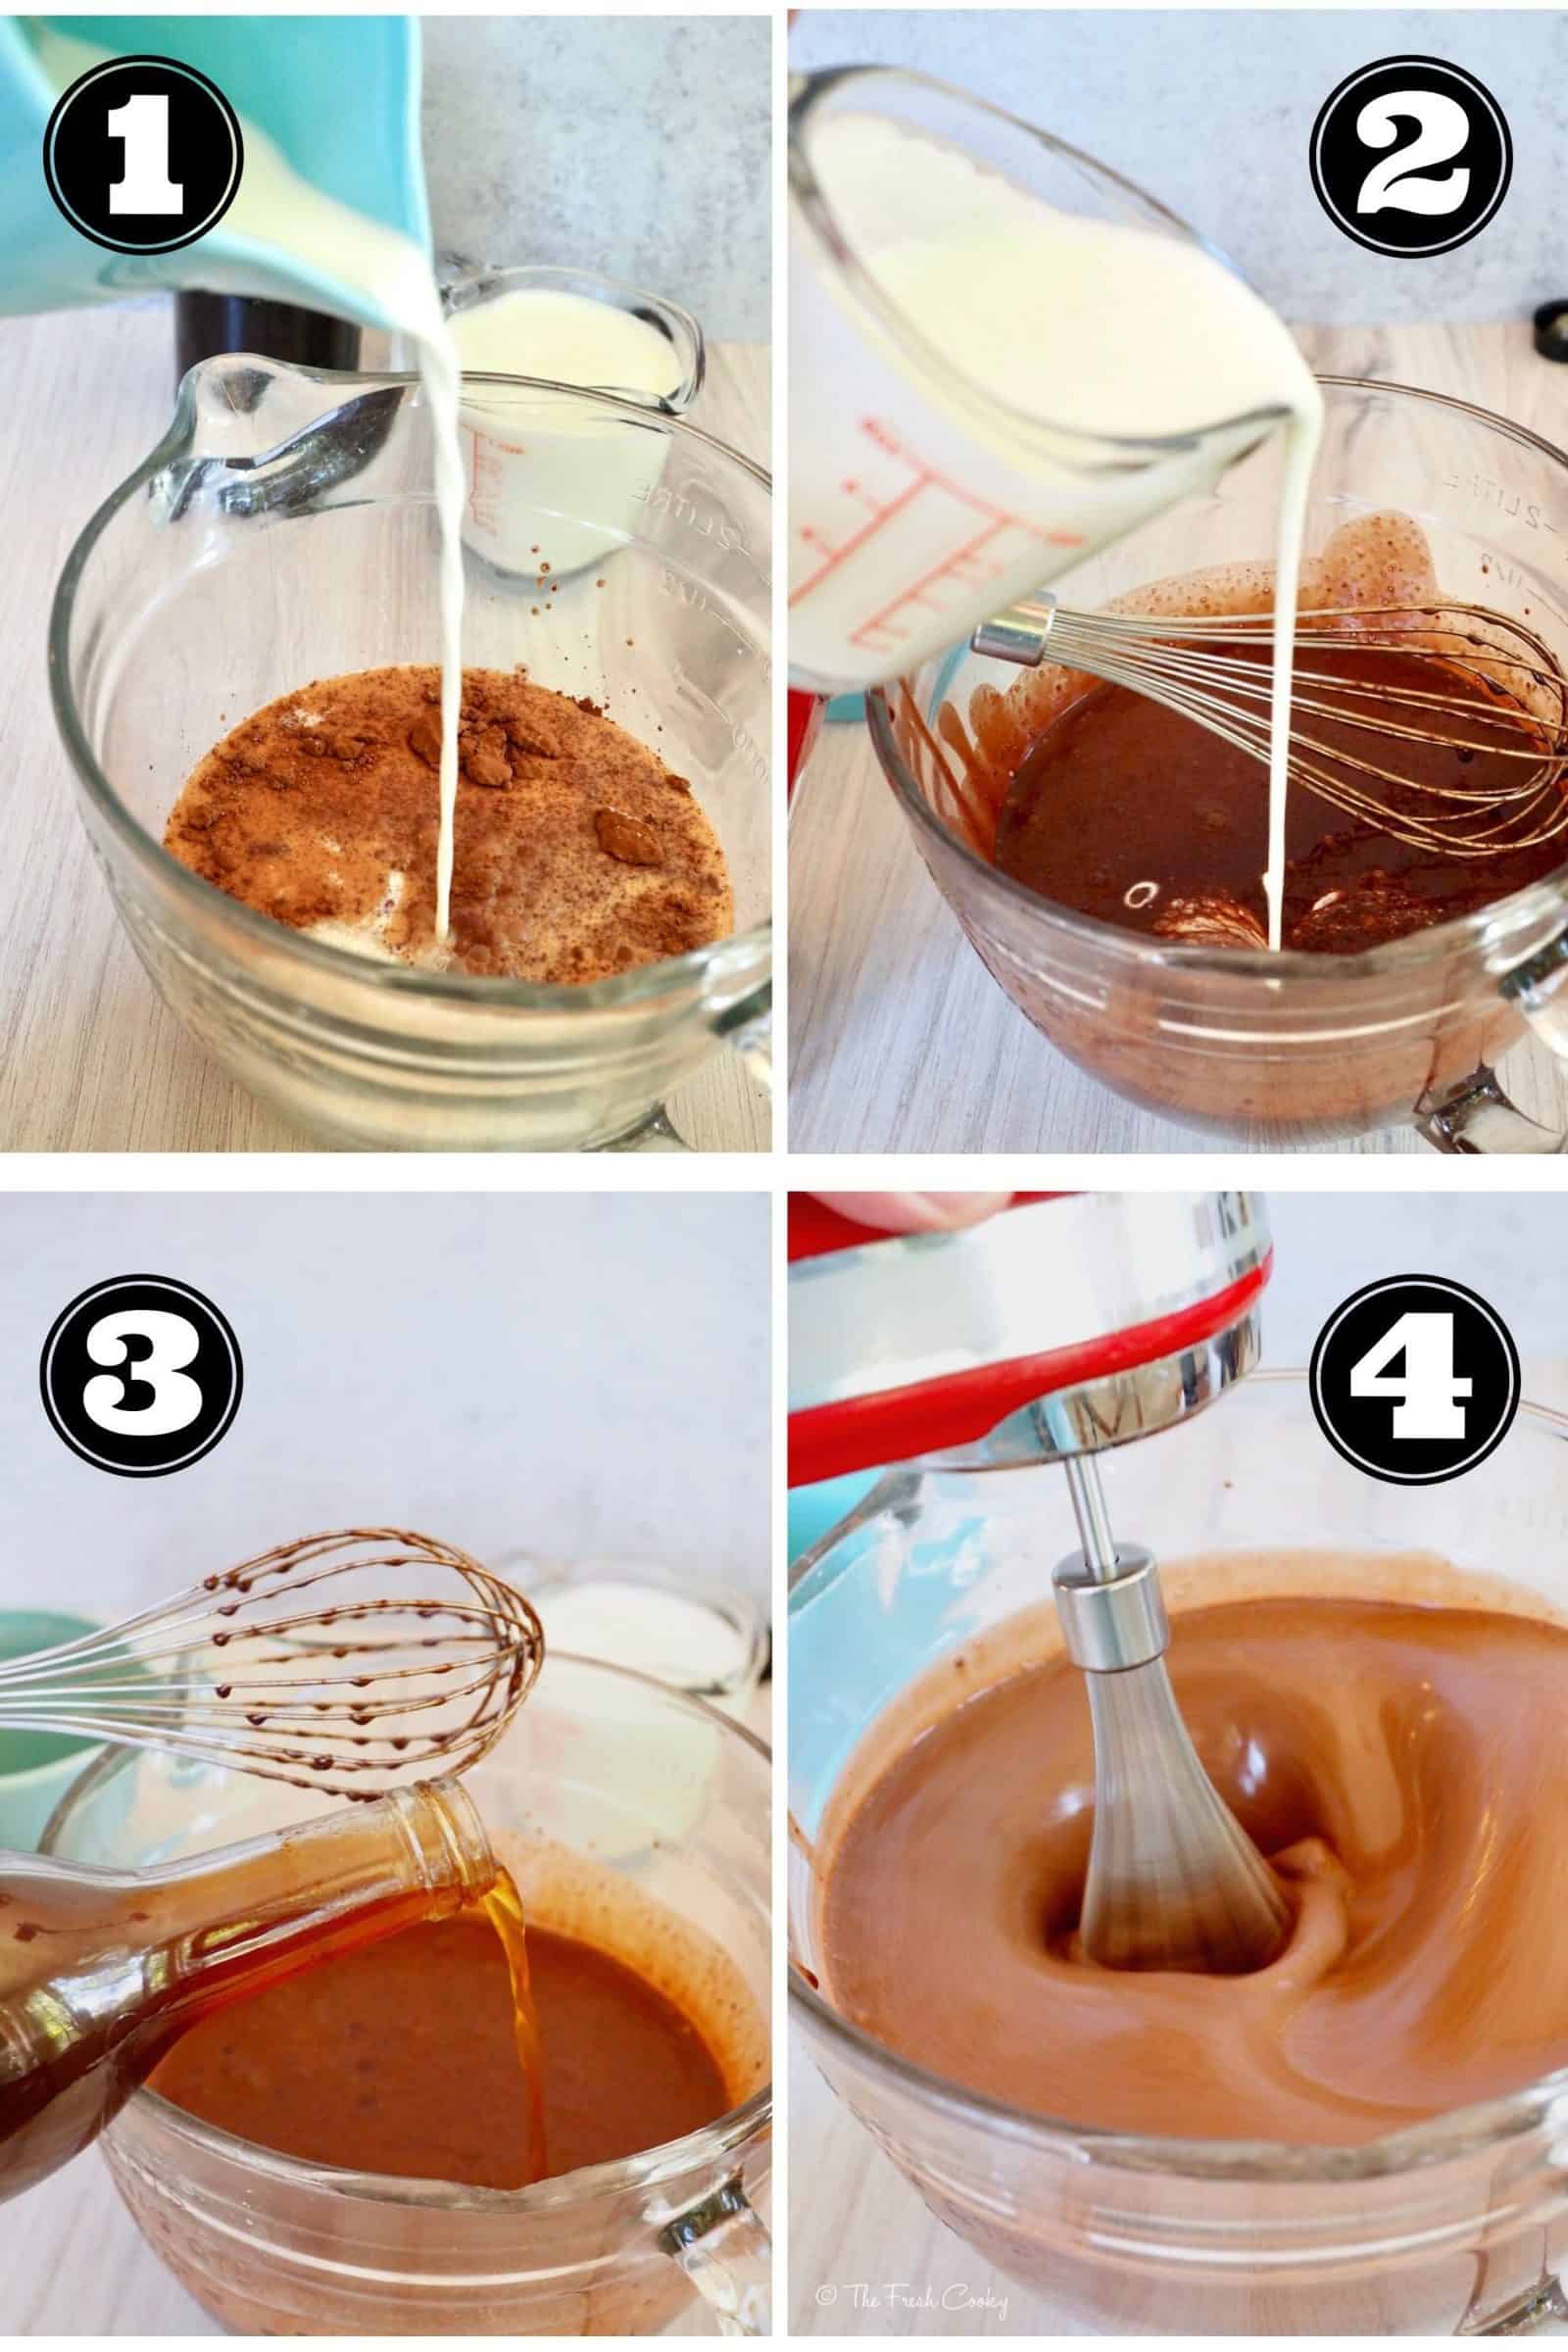 Process shots for old fashioned ice cream. 1. Adding cream to cocoa powder and sugar. 2. pouring in milk to mixture. 3. Whisking mixture.4. Using hand mixer to mix the chocolate ice cream mixture.